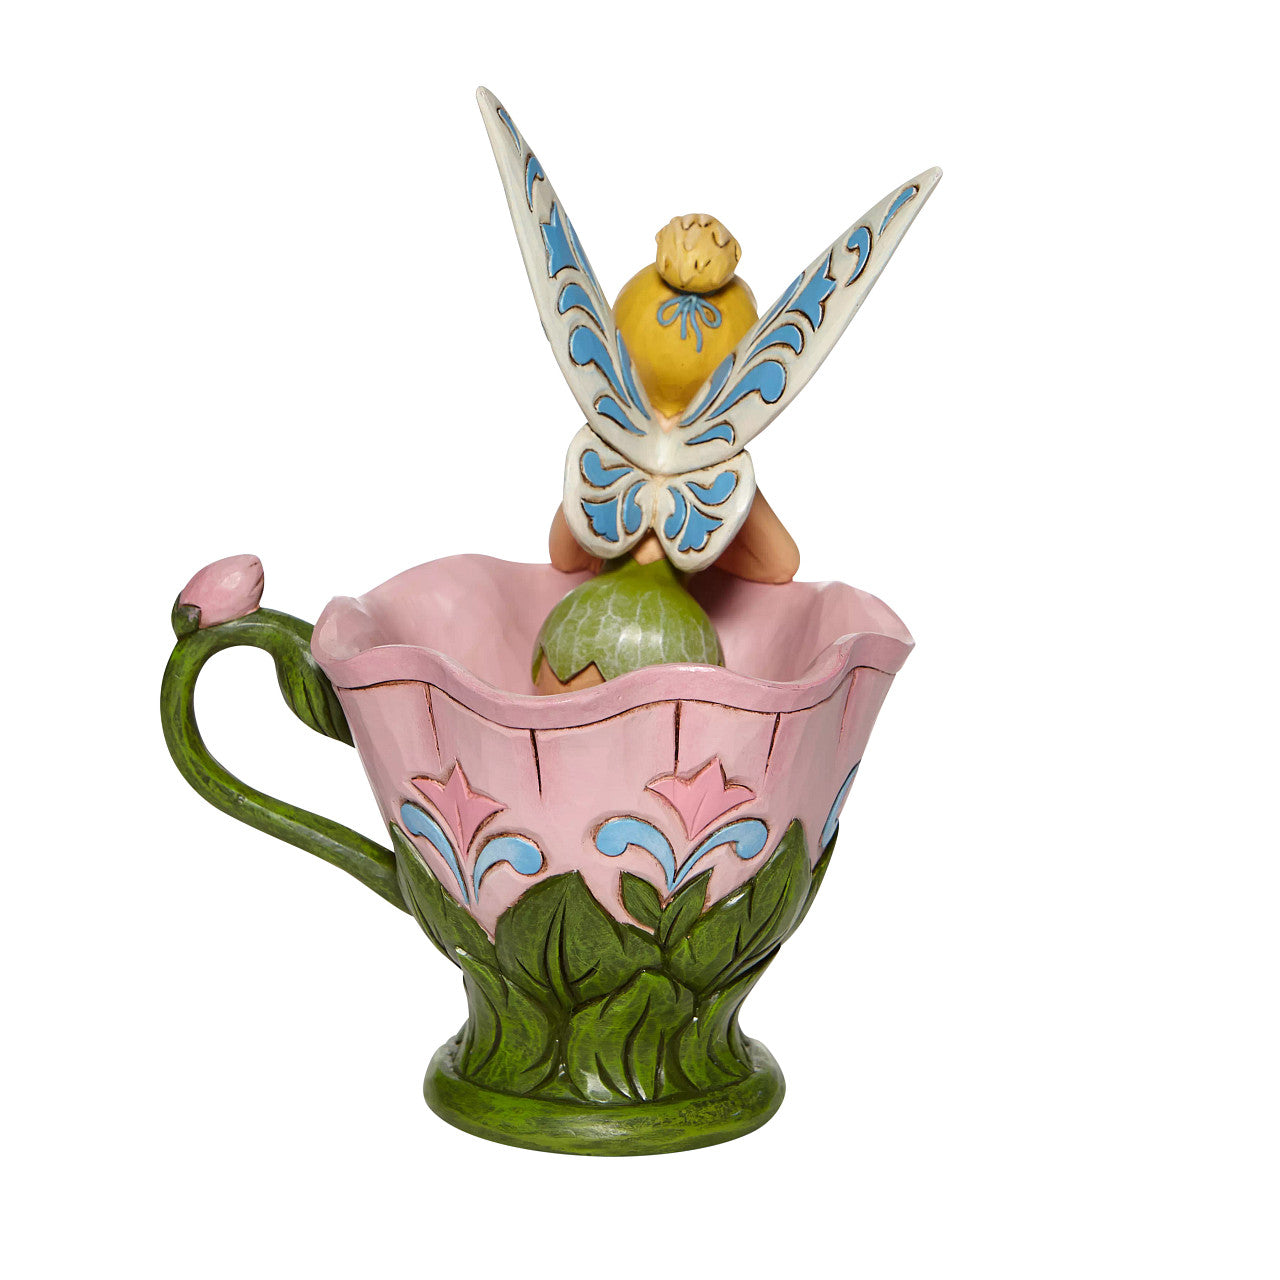 A Spot of Tink - Tinker Bell Sitting in a Flower